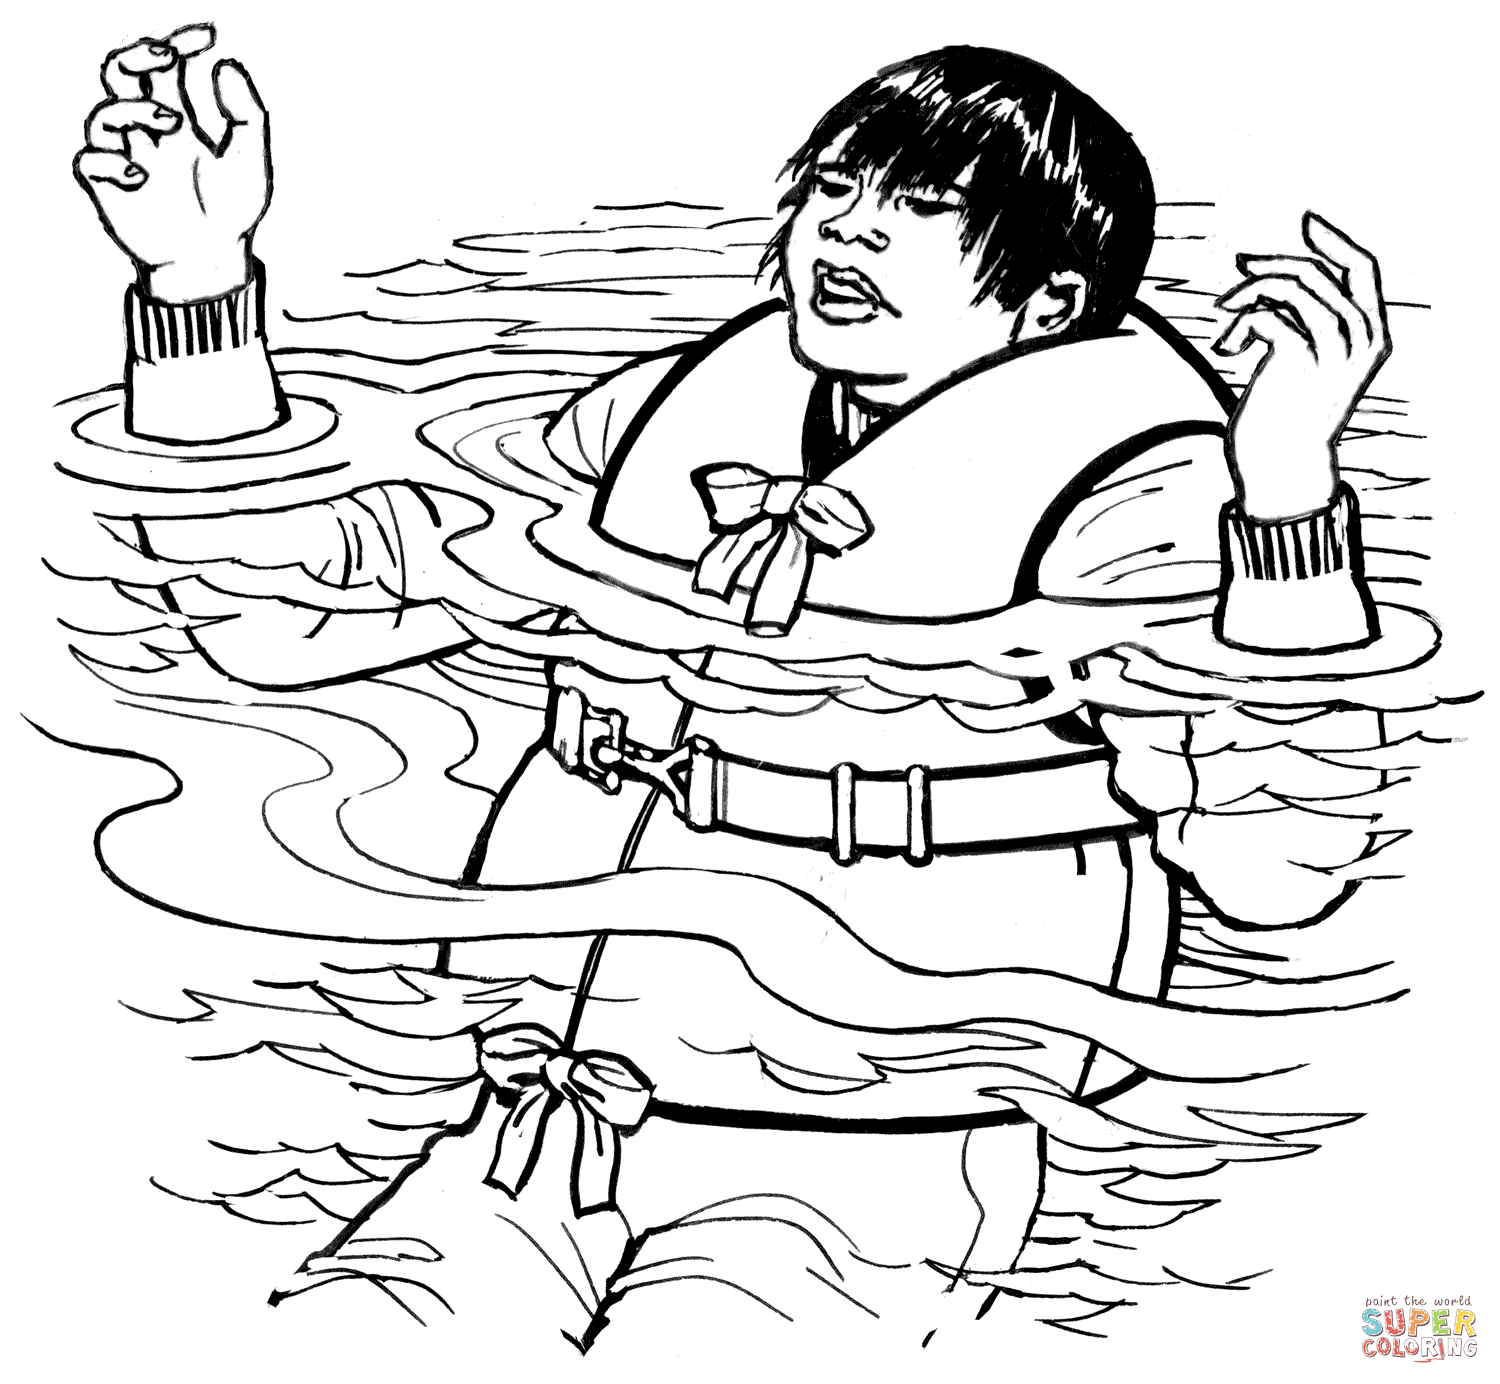 Ships and Boats coloring pages | Free Coloring Pages